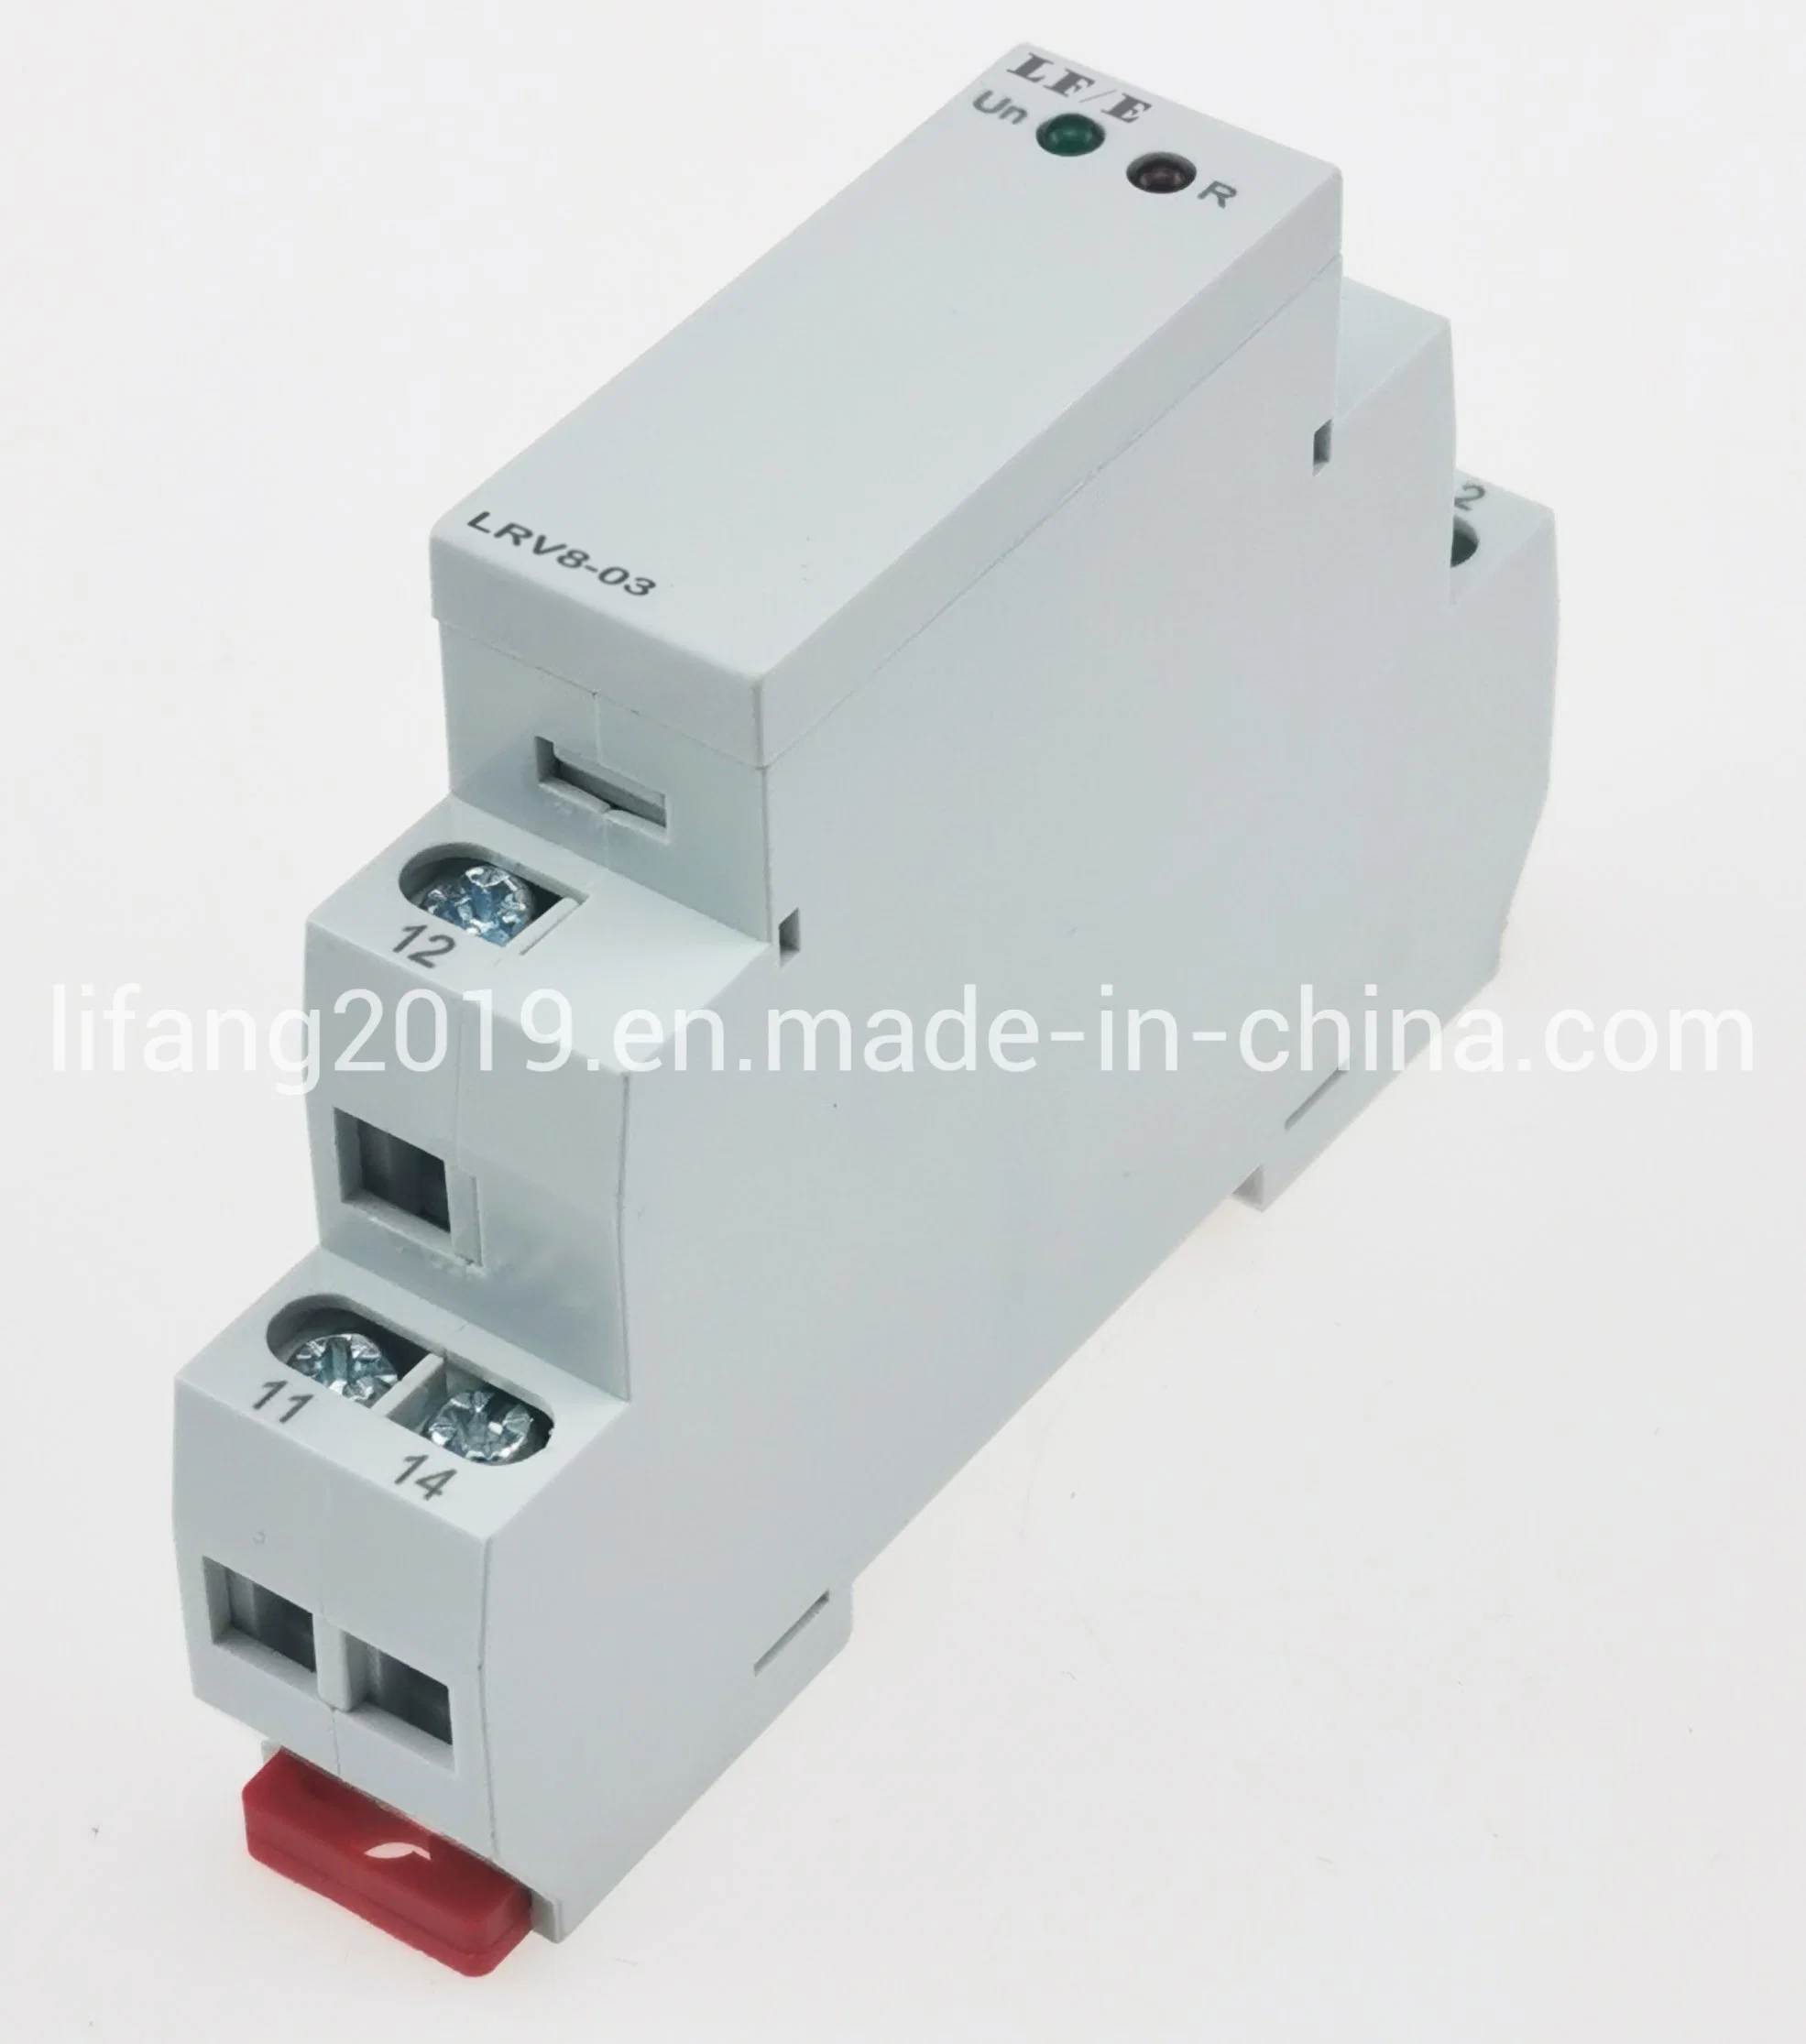 Lrv8-04 Type 3 Phase+N Monitoring Voltage Relay, Industrial Control Phase Sequence and Phase Failure Protection Relay, 3 Phase Monitoring Voltage Relay